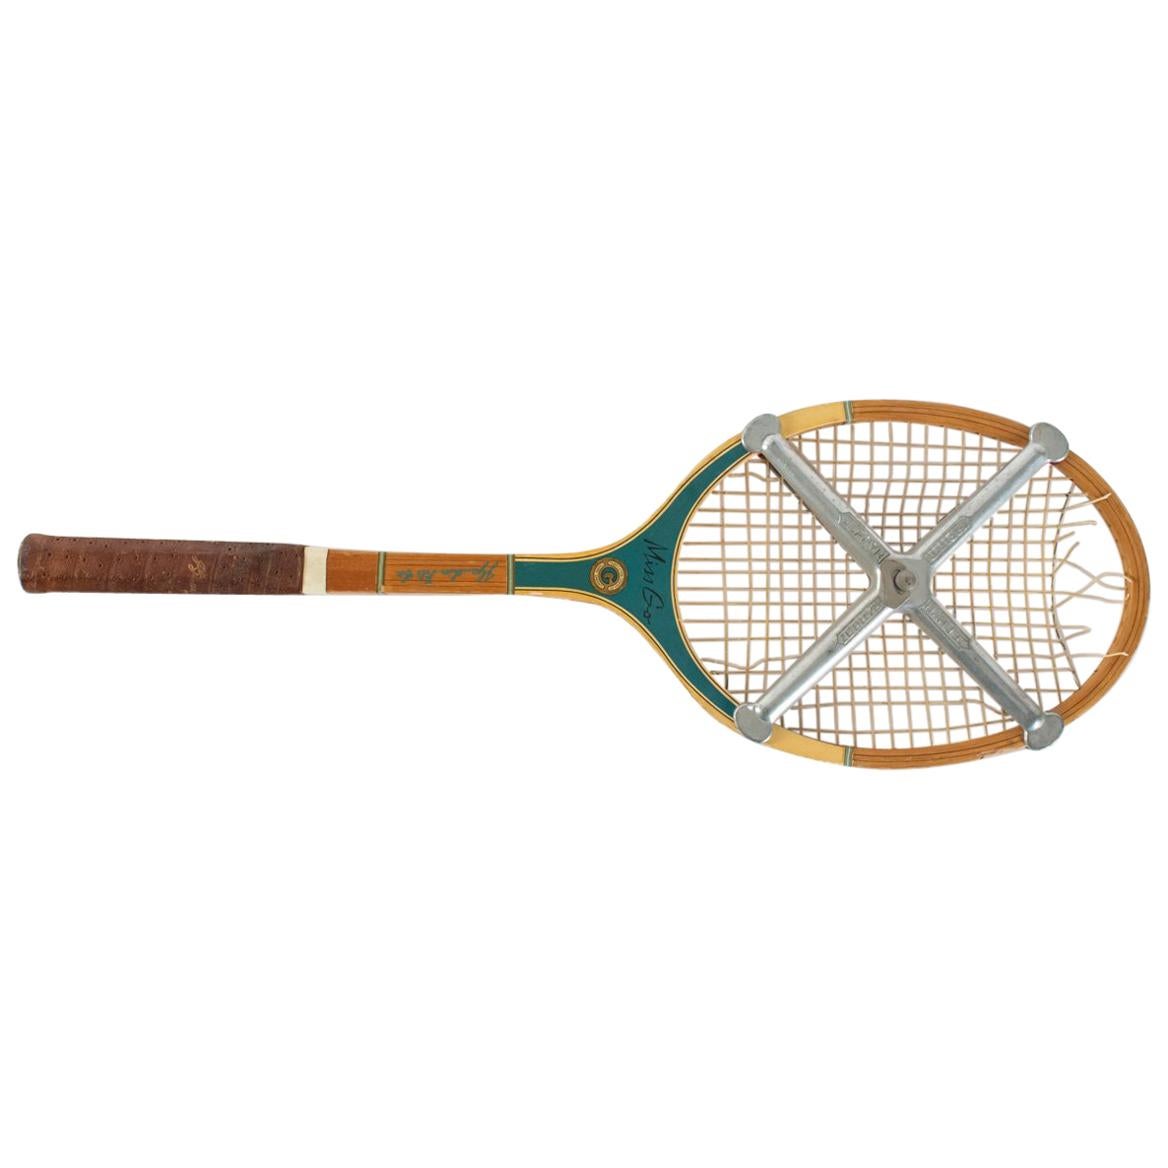 Tennis Racket, Miss Go, Pro, Middle of the 20th Century.